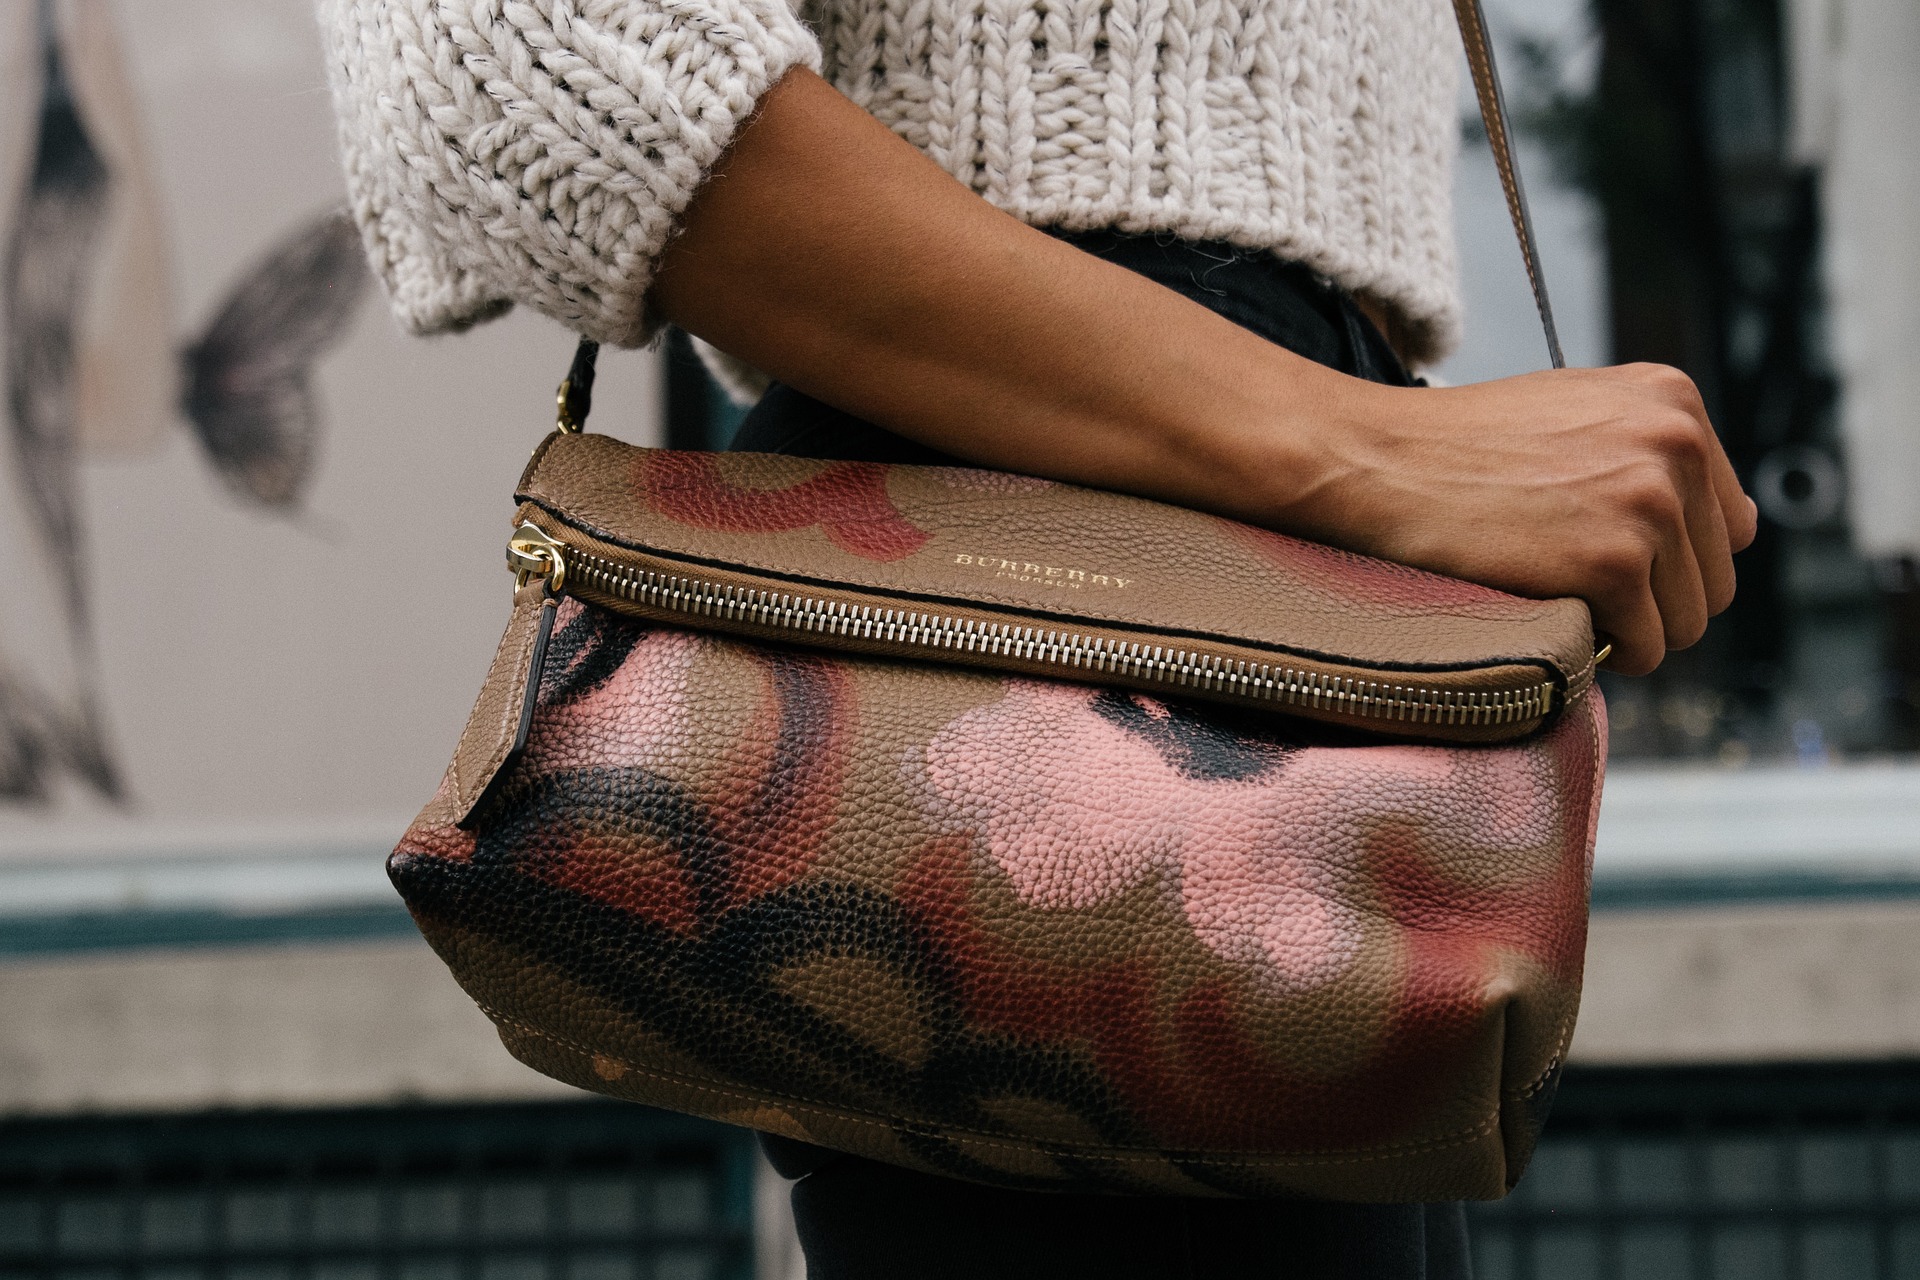 It’s Handbags Galore for Every Type of Budget